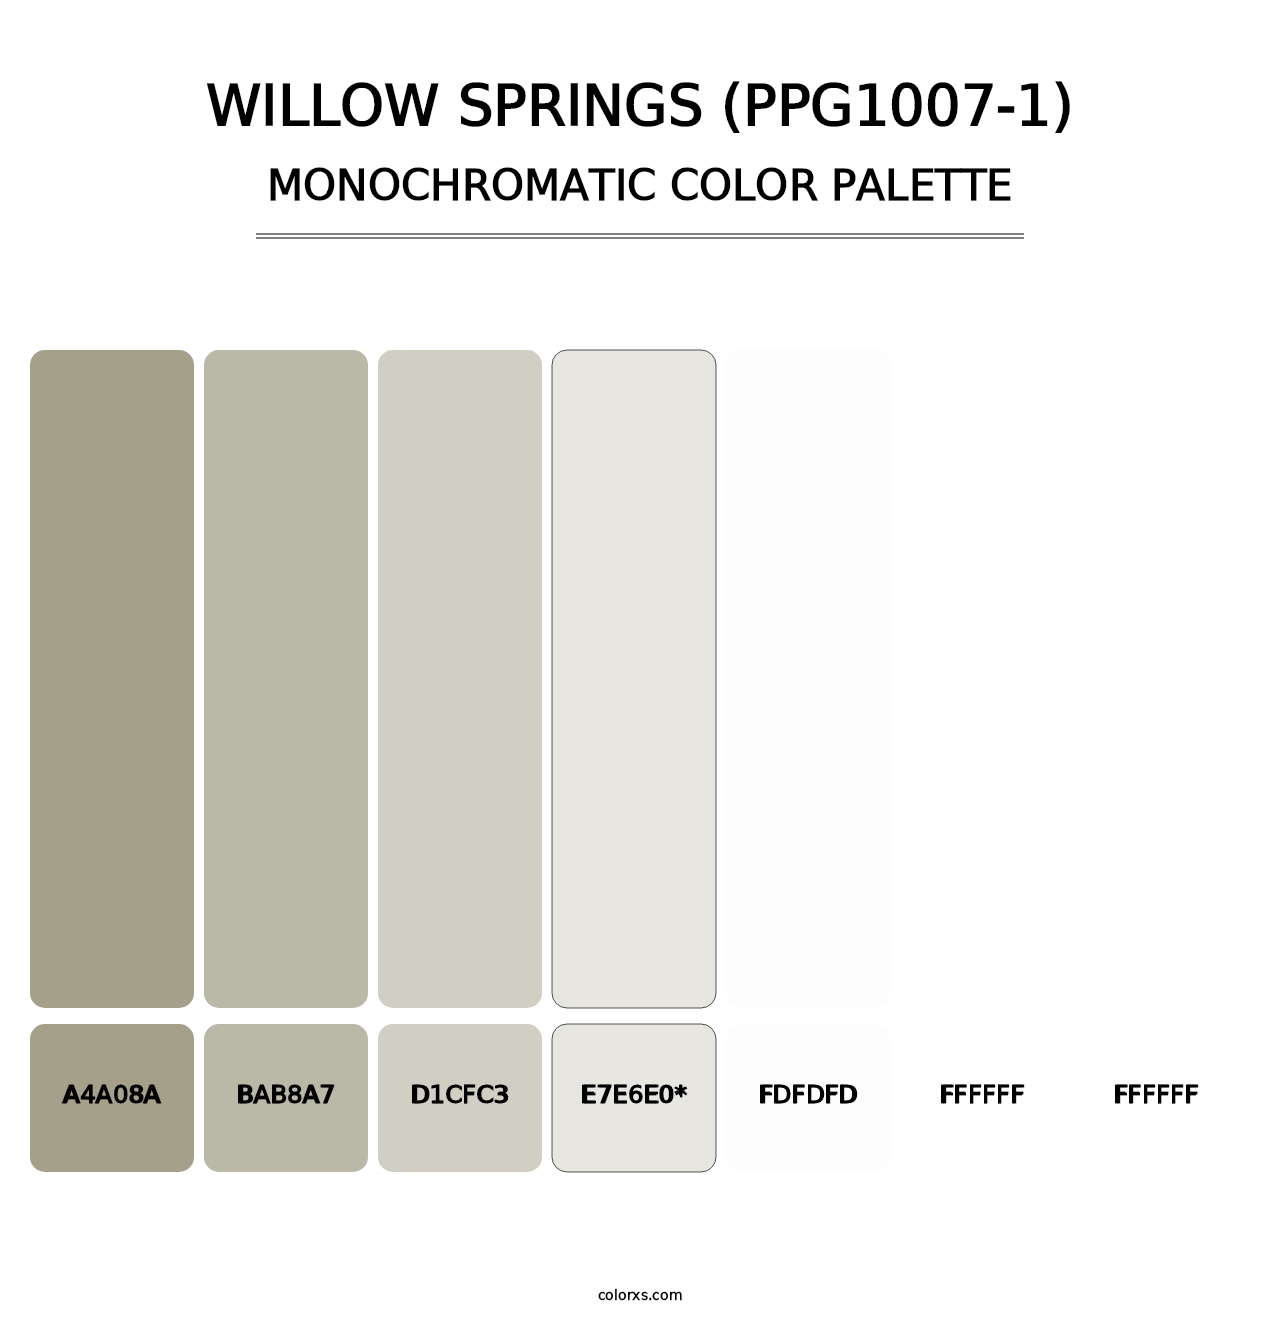 Willow Springs (PPG1007-1) - Monochromatic Color Palette